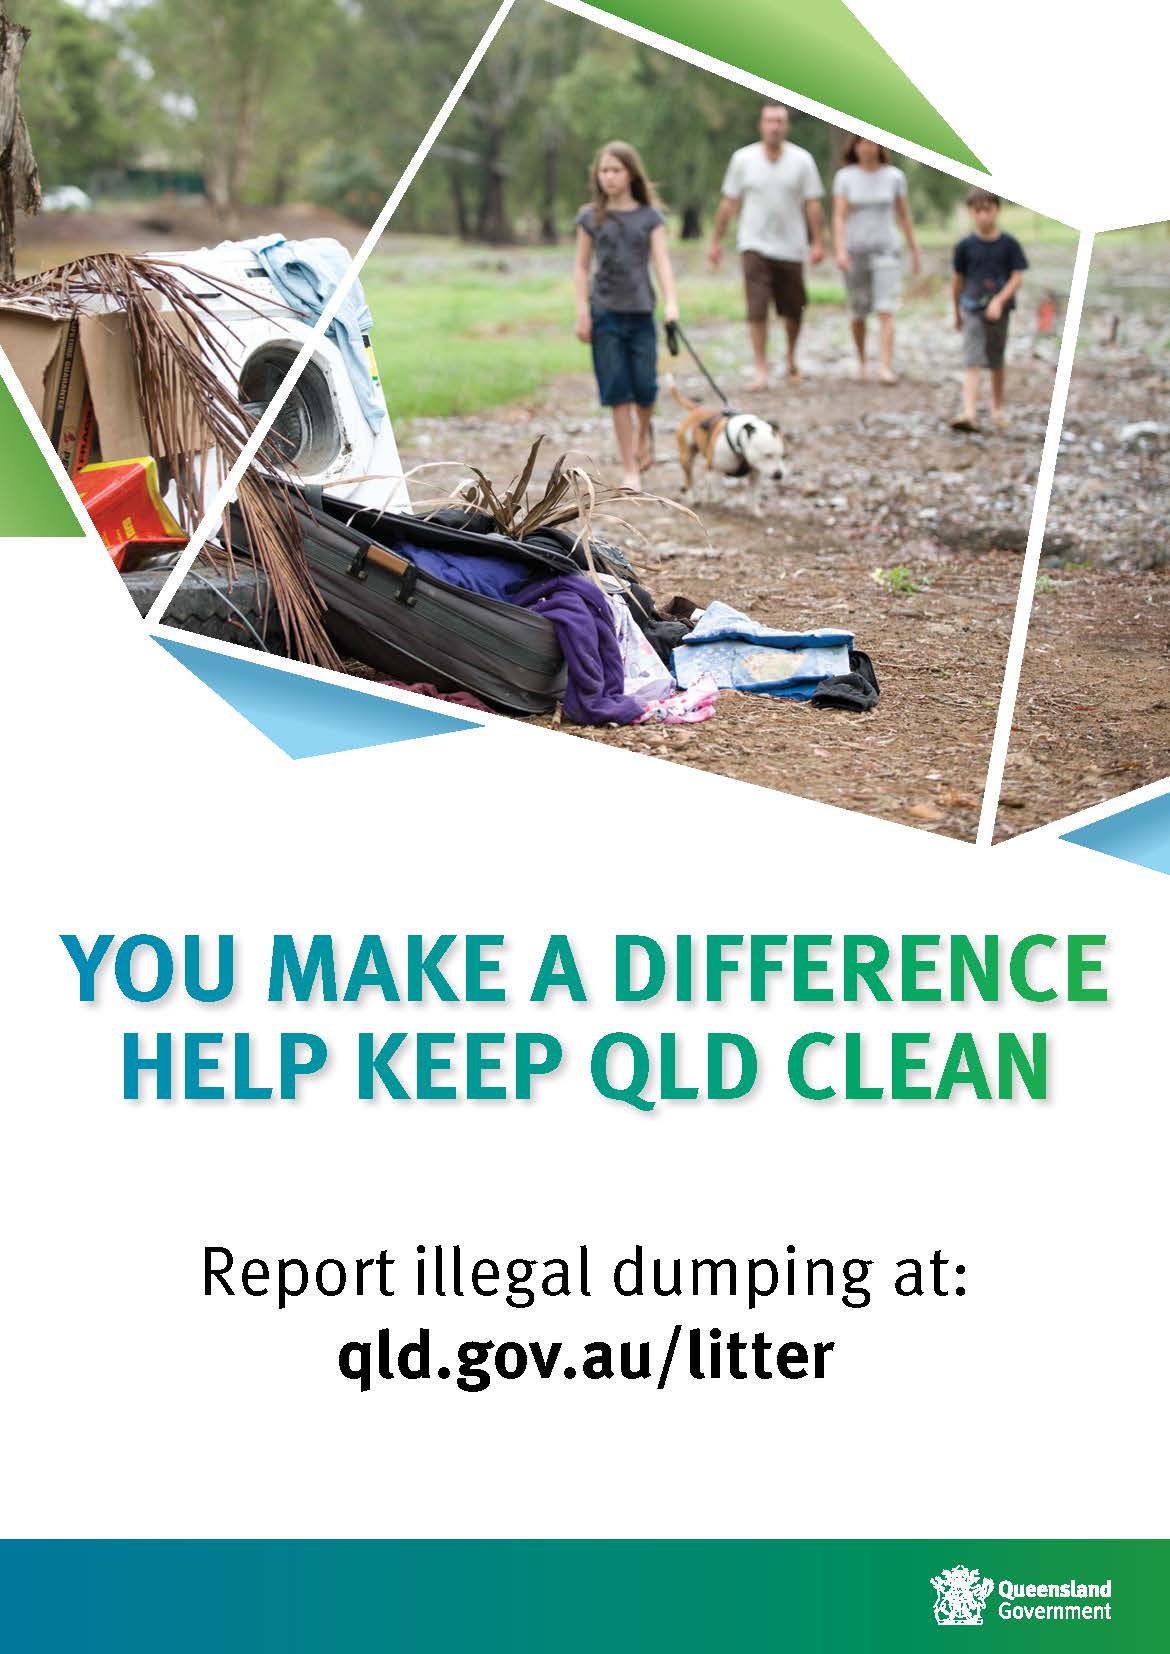 Release of "Keeping Queensland Clean: the Litter and Illegal Dumping Plan"

